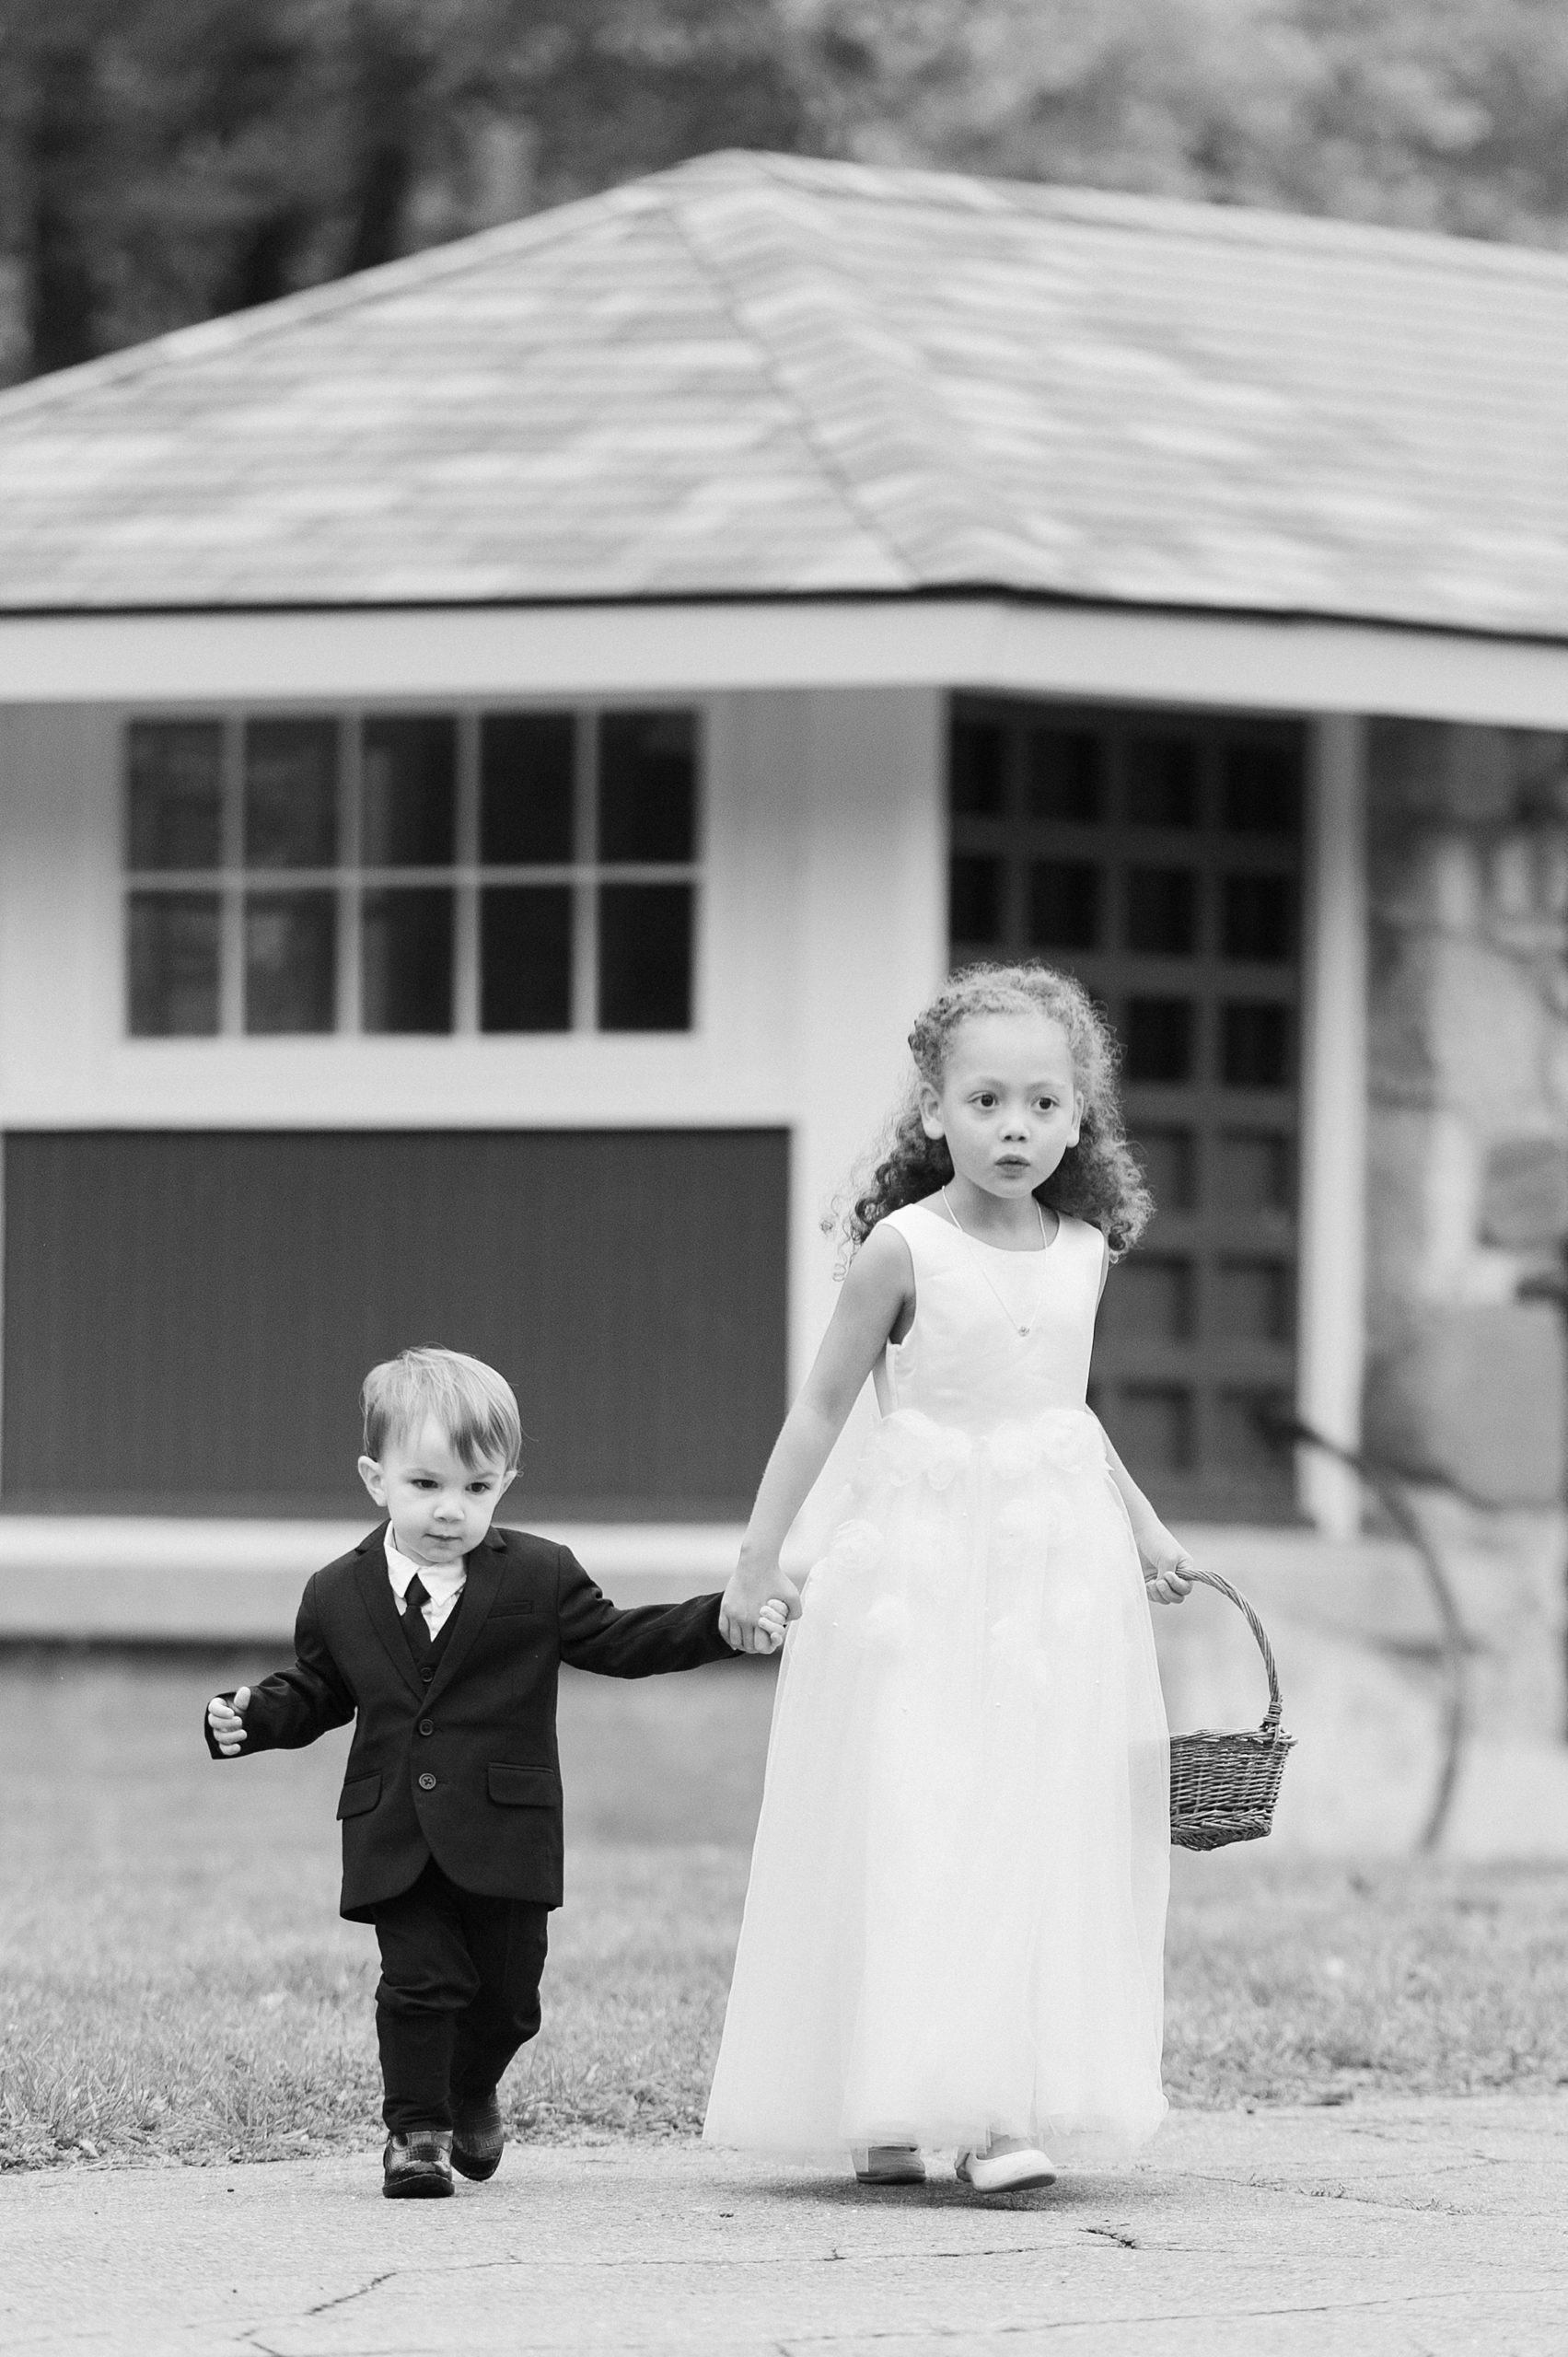 ring bearer and flower girl in black and white at wedding ceremony